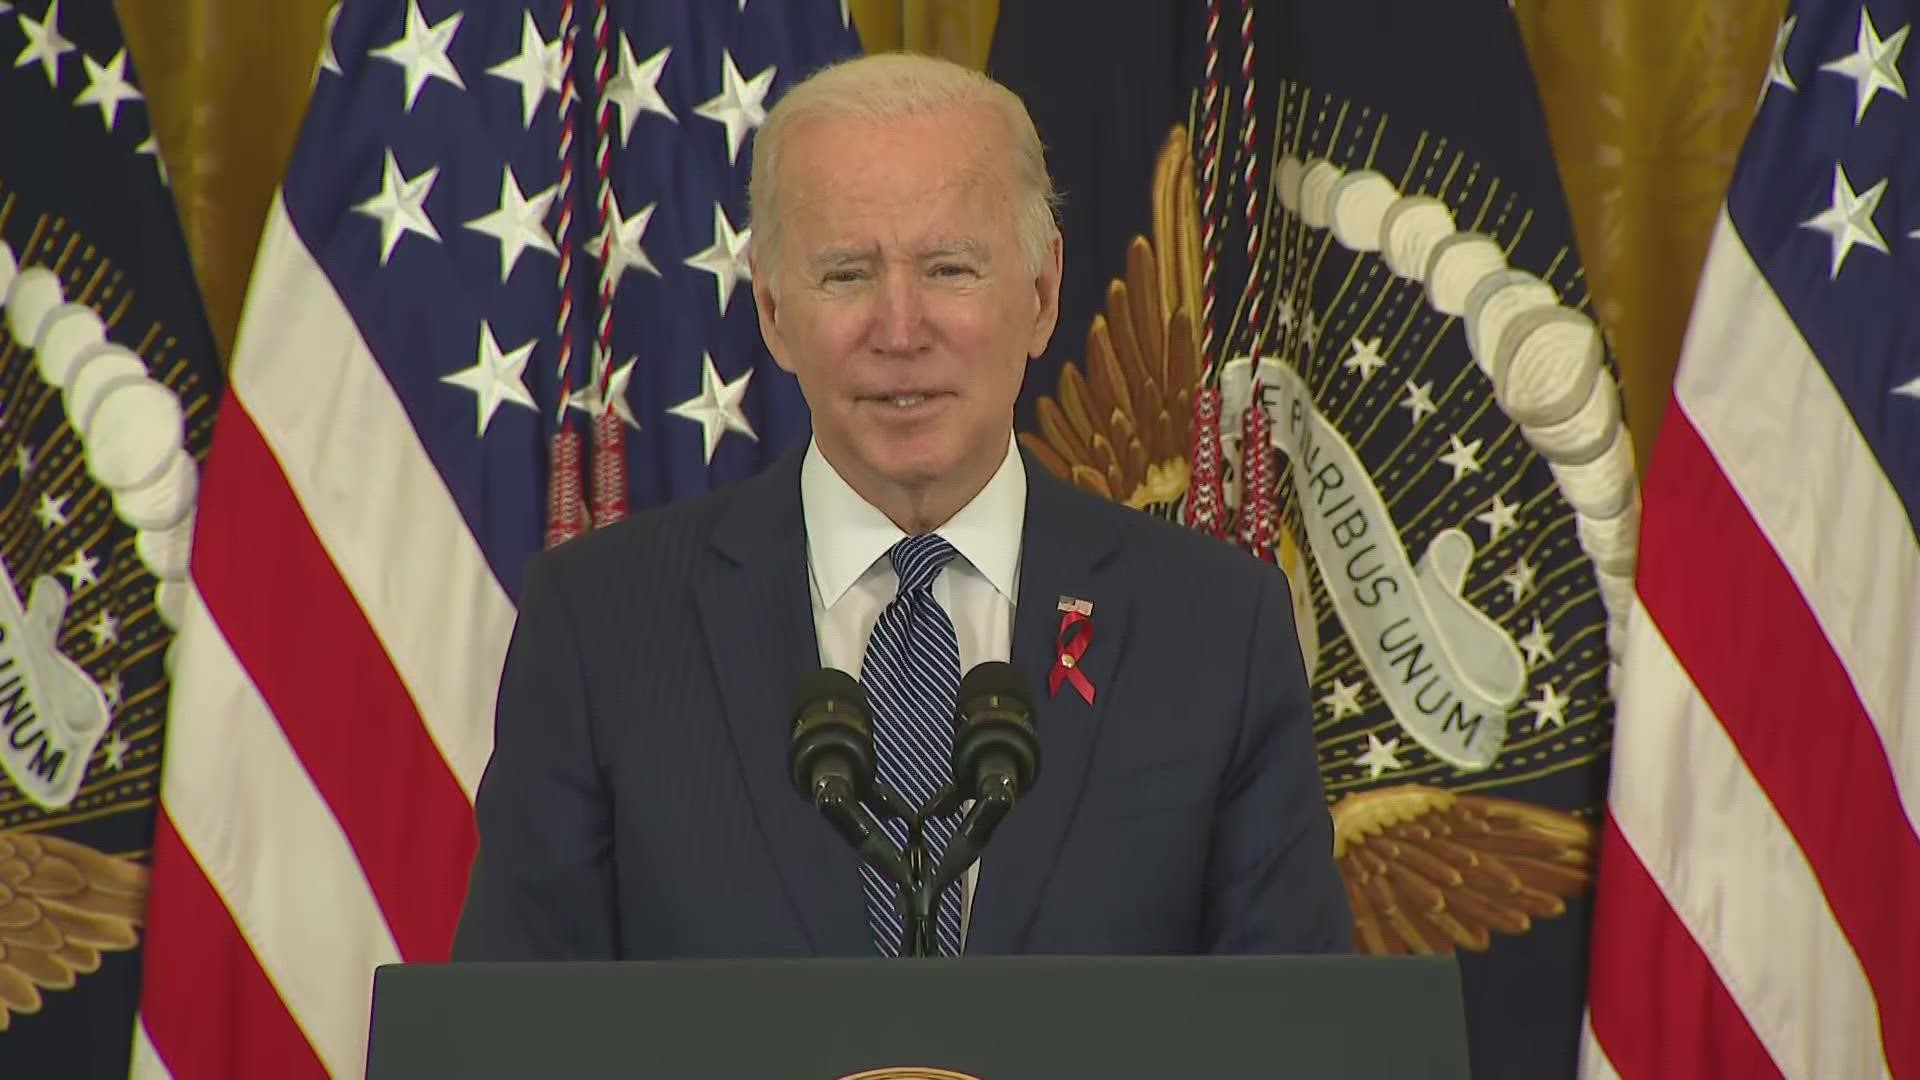 President Joe Biden on Wednesday unveiled his new HIV/AIDS strategy to end the more than 40-year-old epidemic, calling for a renewed focus on vulnerable Americans.